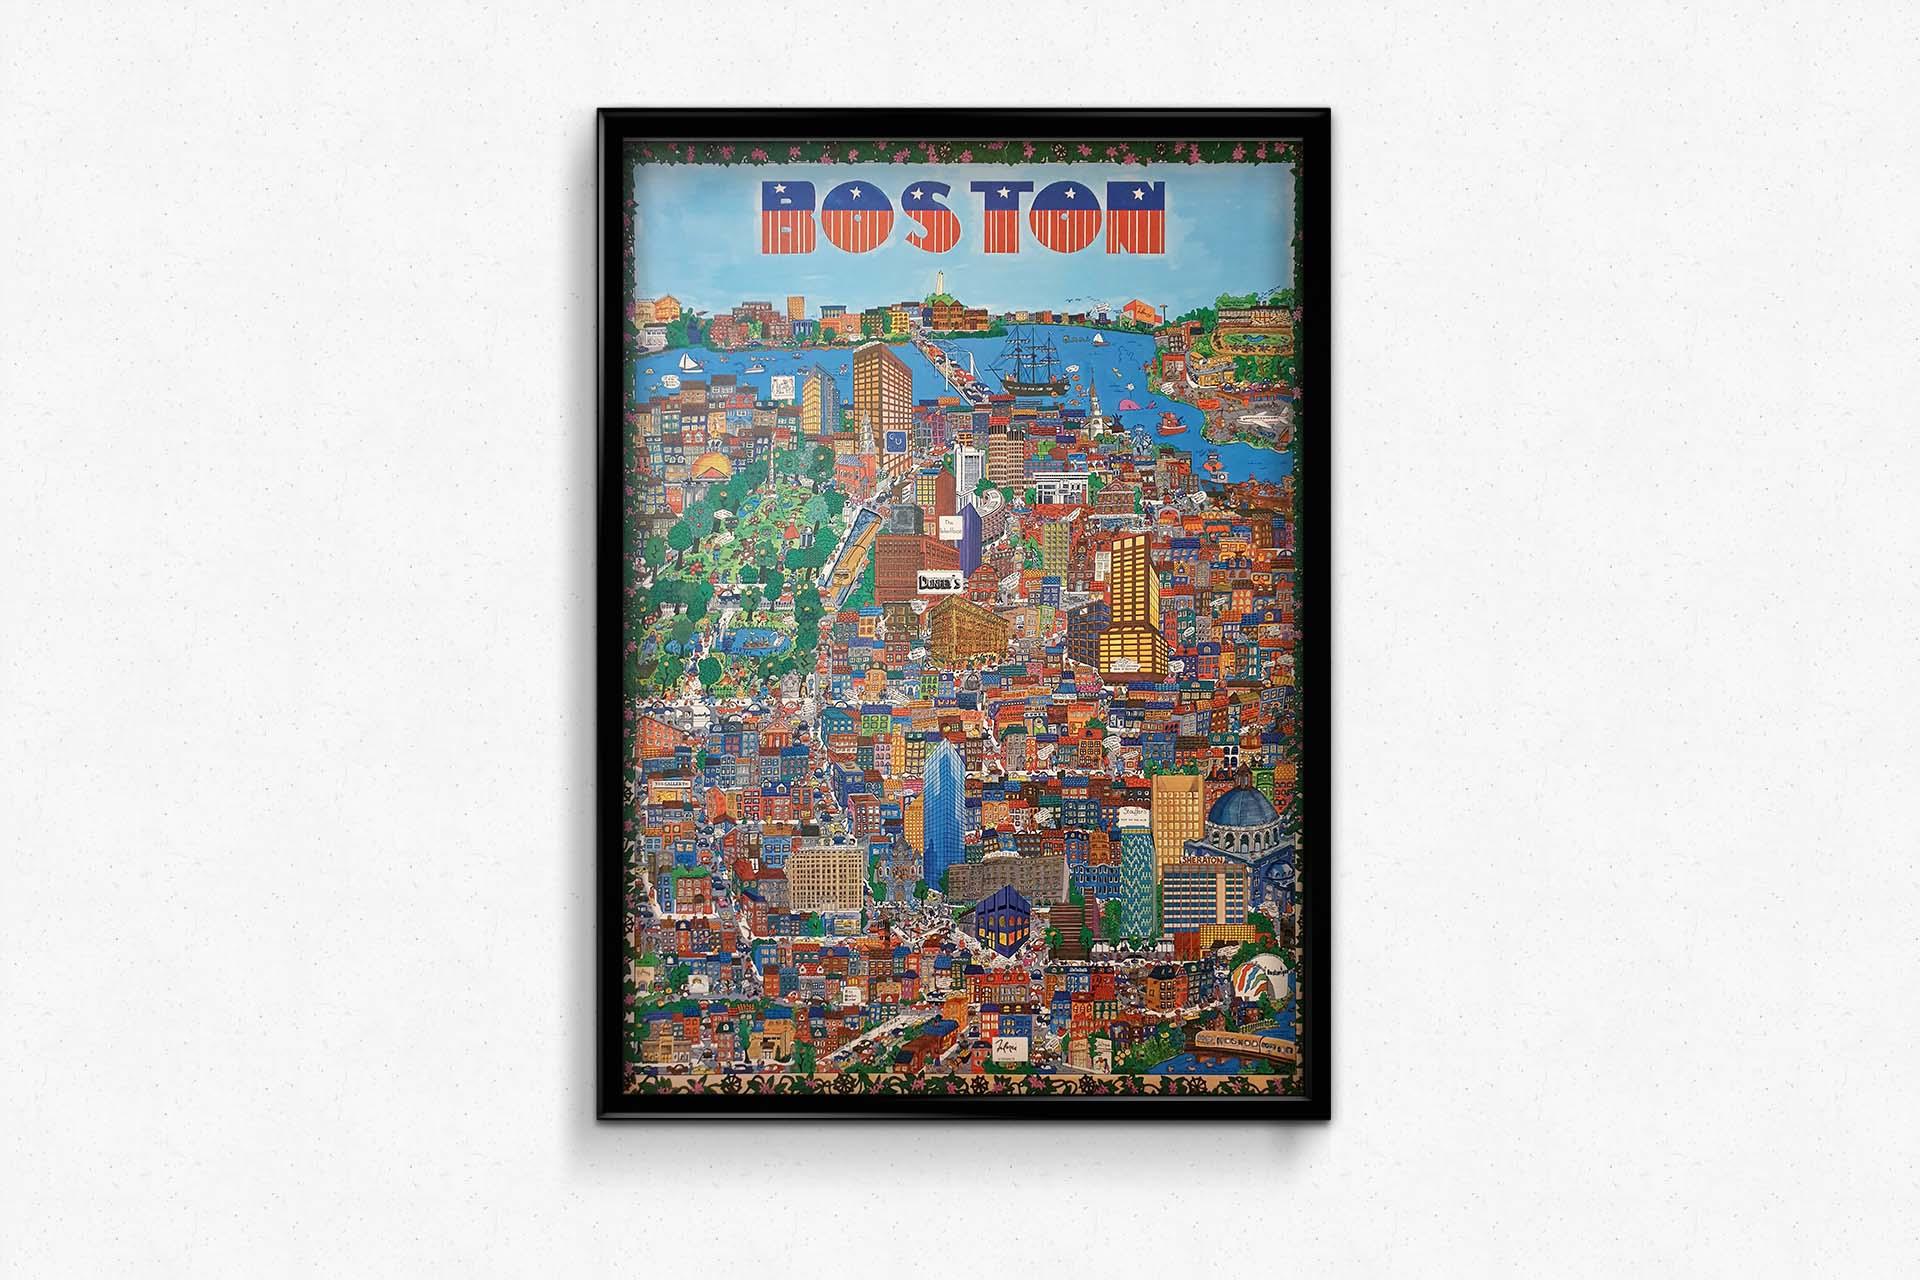 Nice tourist poster about the city of Boston. Boston is the capital and largest city of the state of Massachusetts and the New England region in the northeastern United States. Founded in 1630, Boston is one of the oldest cities in the United